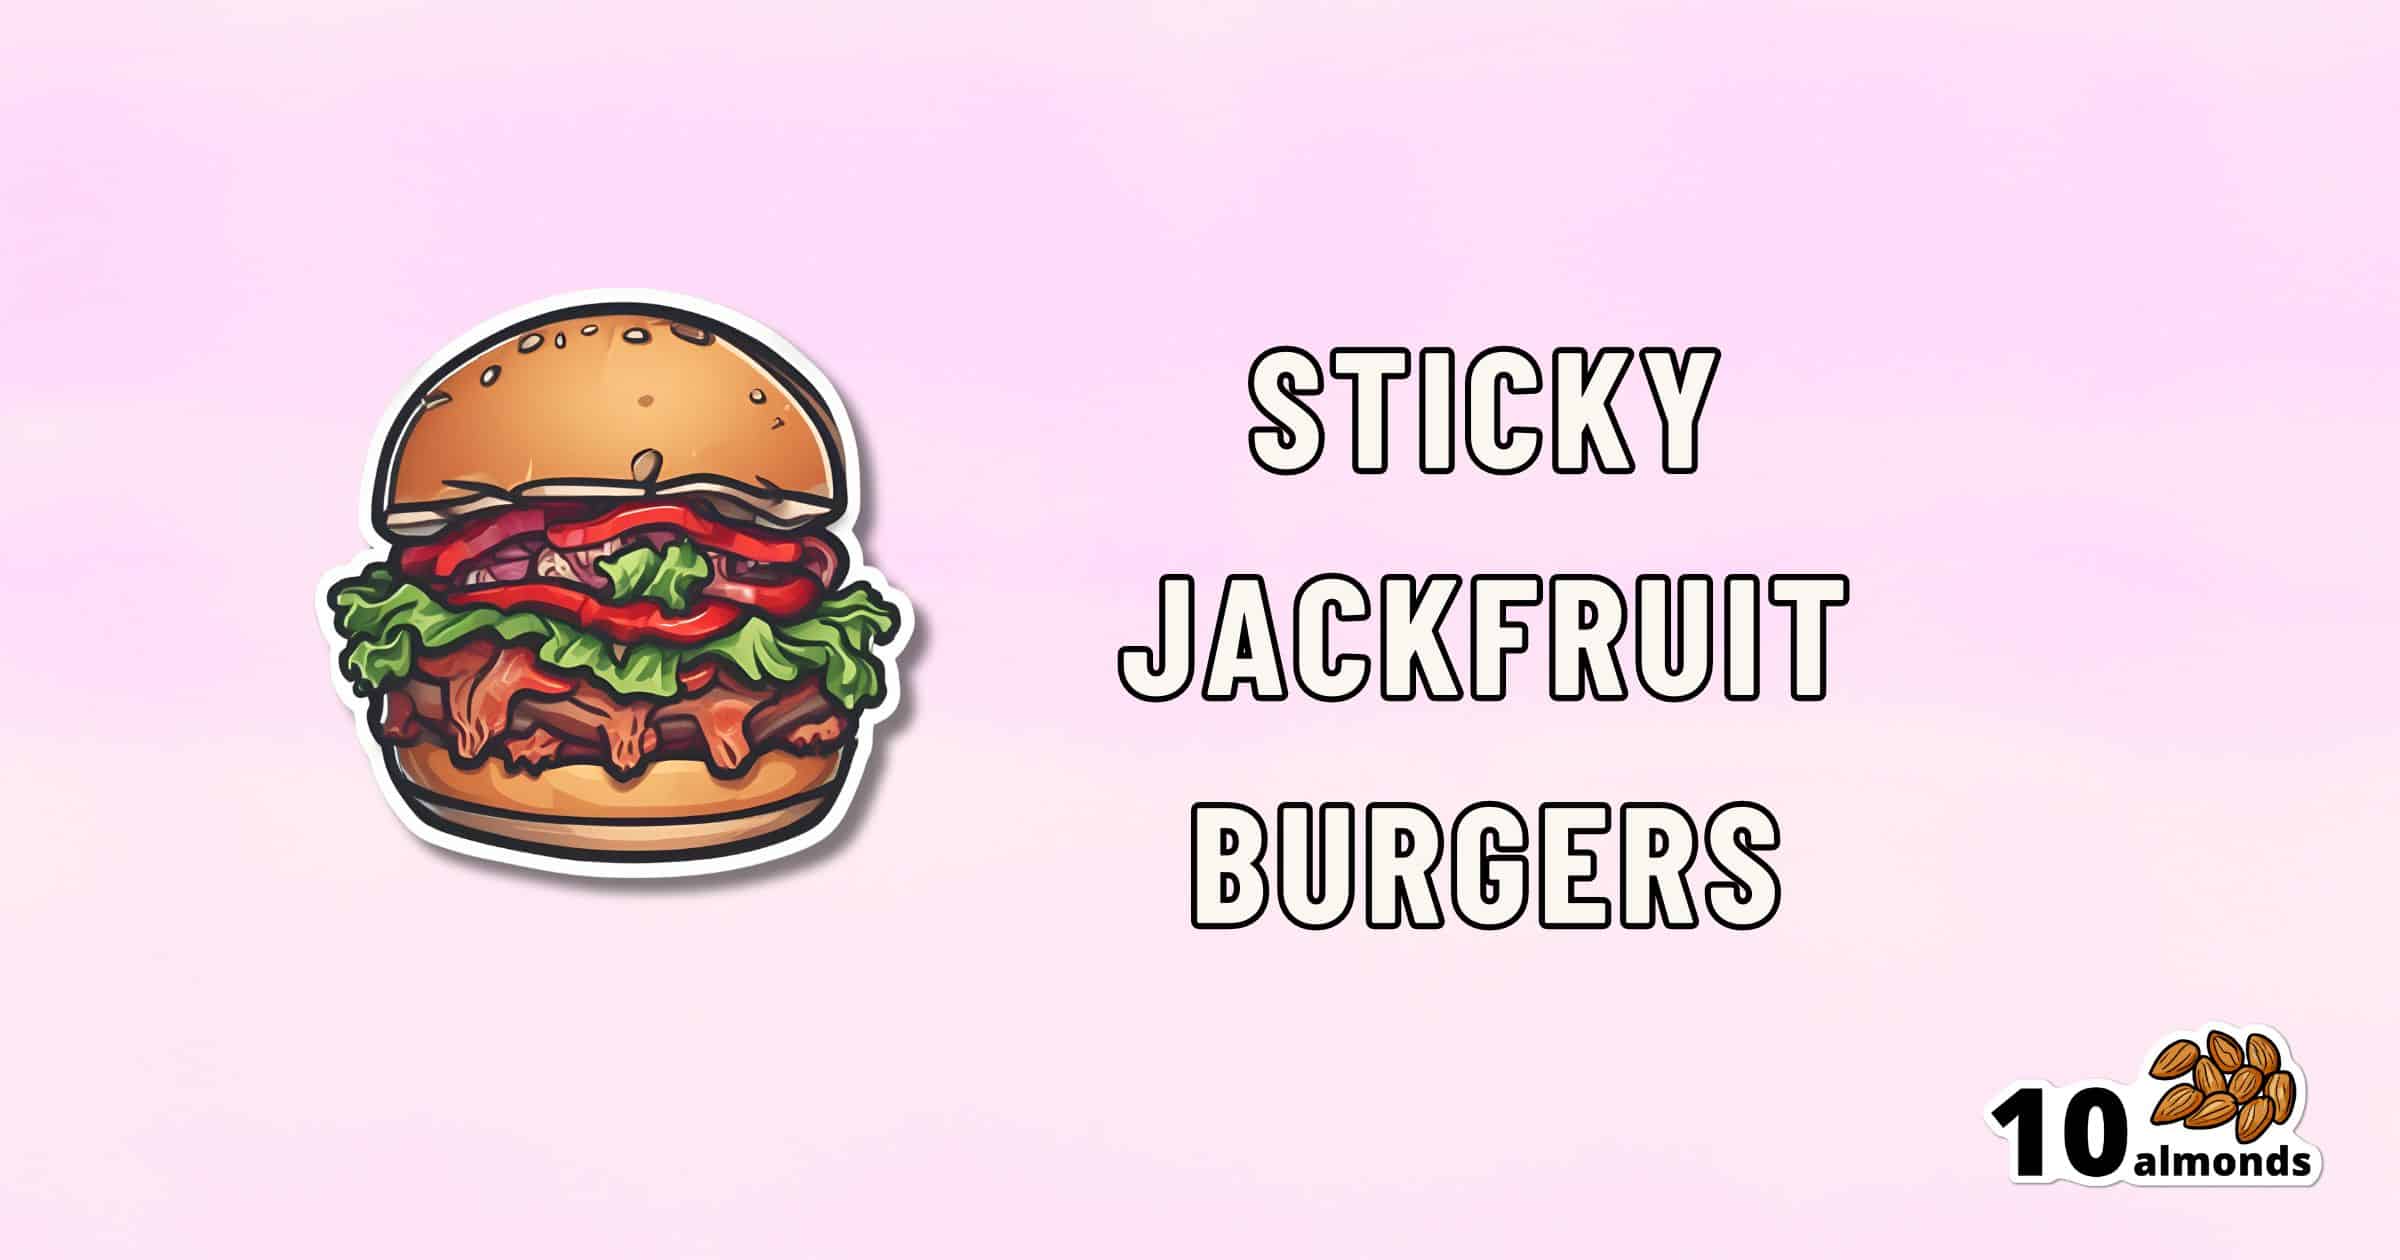 An illustration of a burger with text that reads "STICKY JACKFRUIT BURGERS" against a pink gradient background. The bottom right corner features the text "10 almonds" alongside an image of ten almonds.